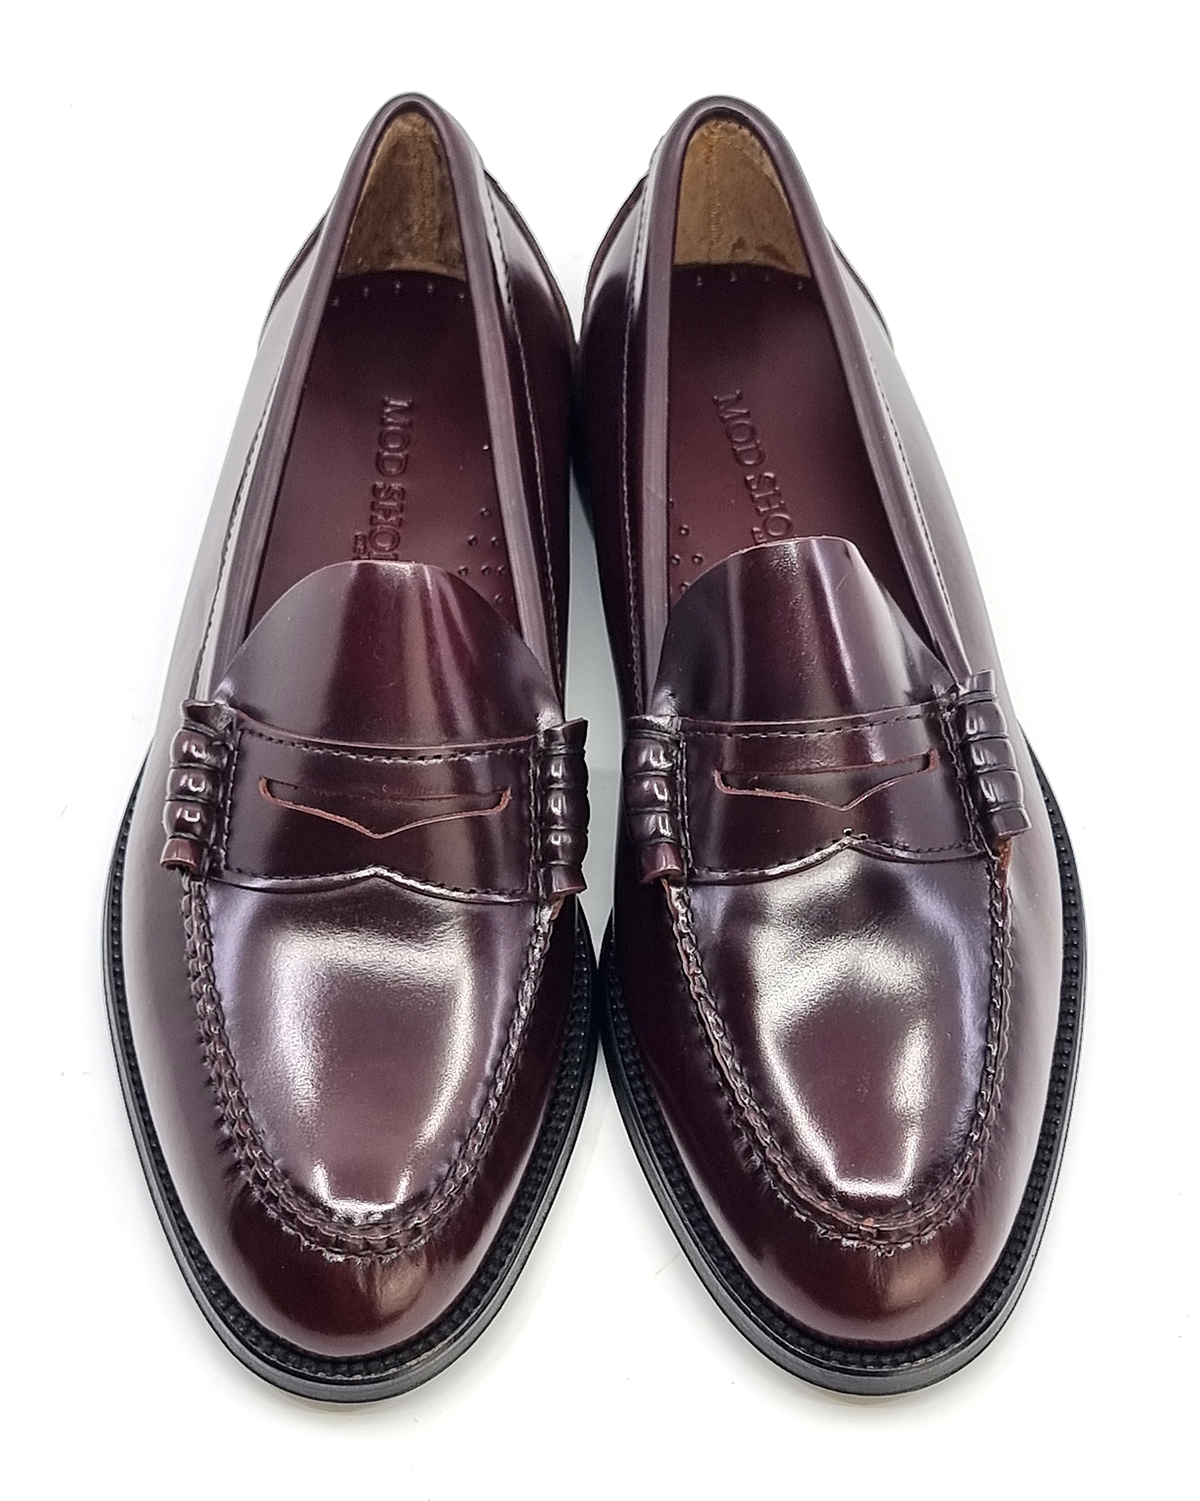 Oxblood Penny Loafers – The “Viscount” By Mod Shoes – Mod Shoes